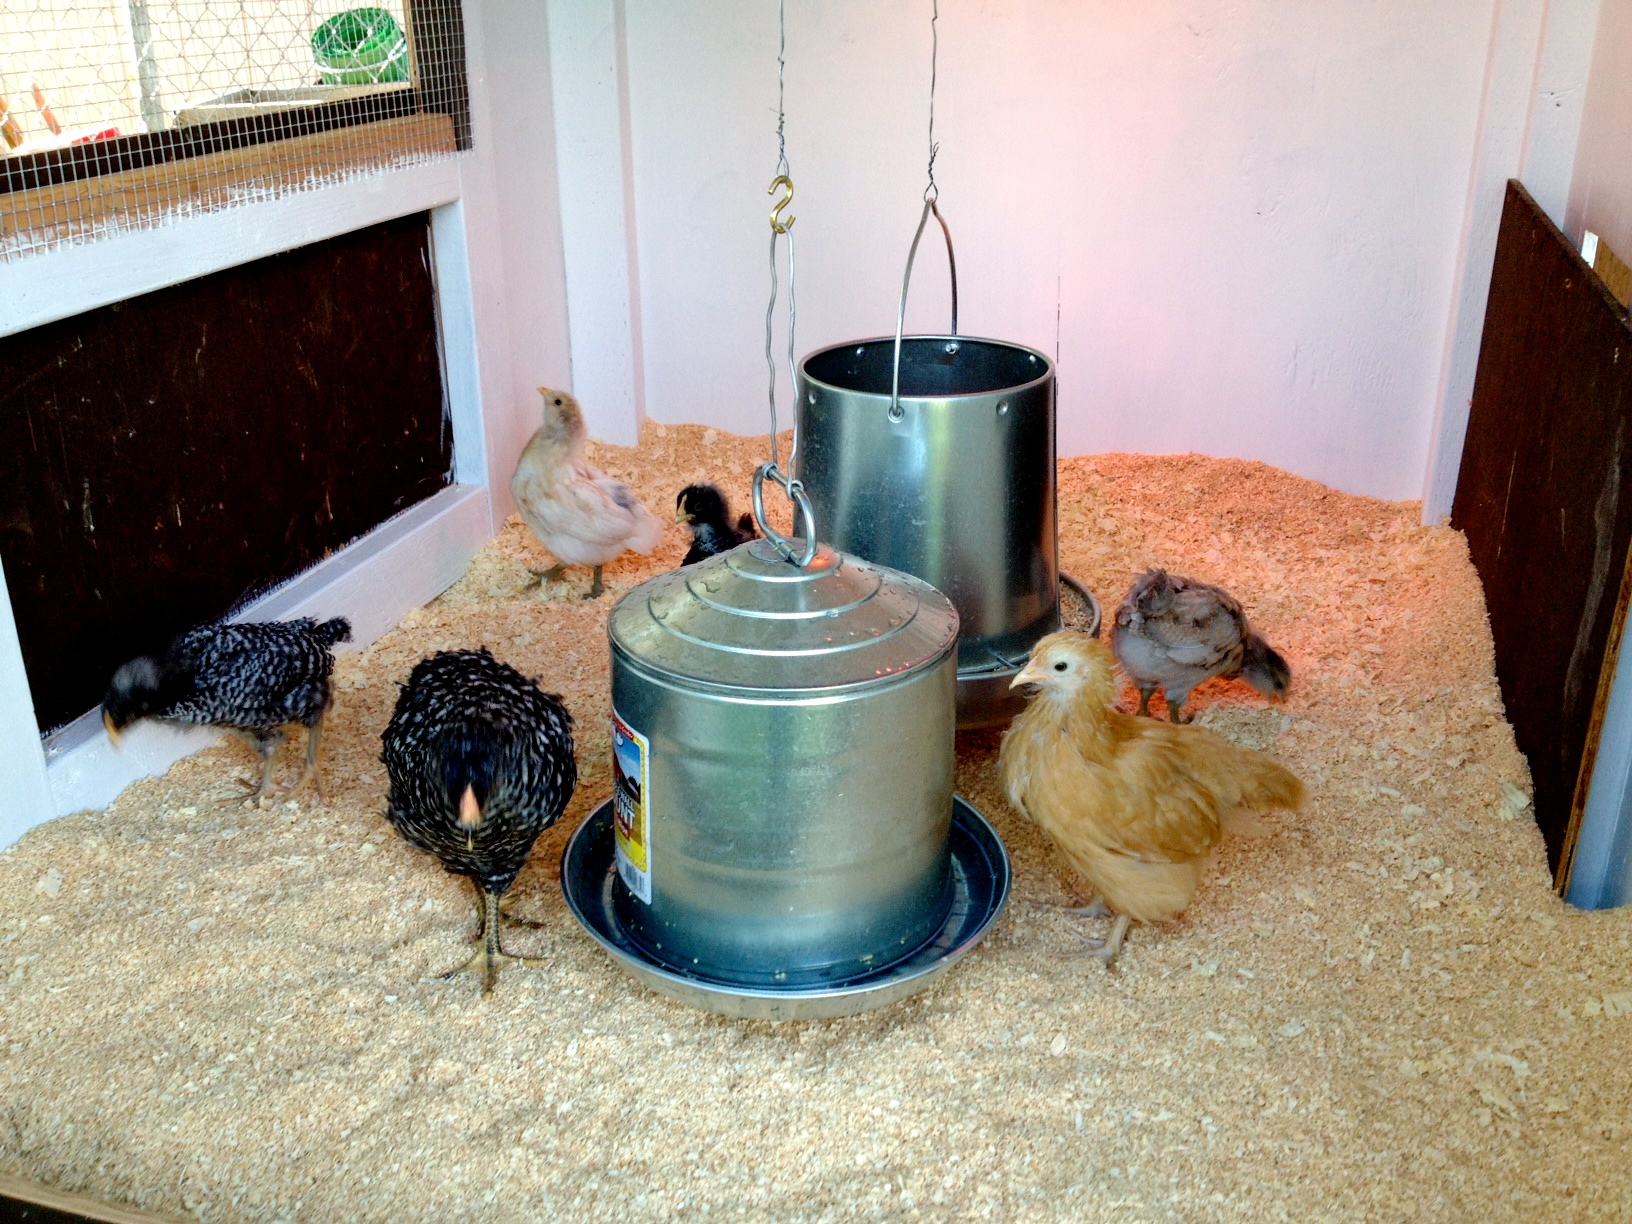 All moved in the the chicken castle. They love it!